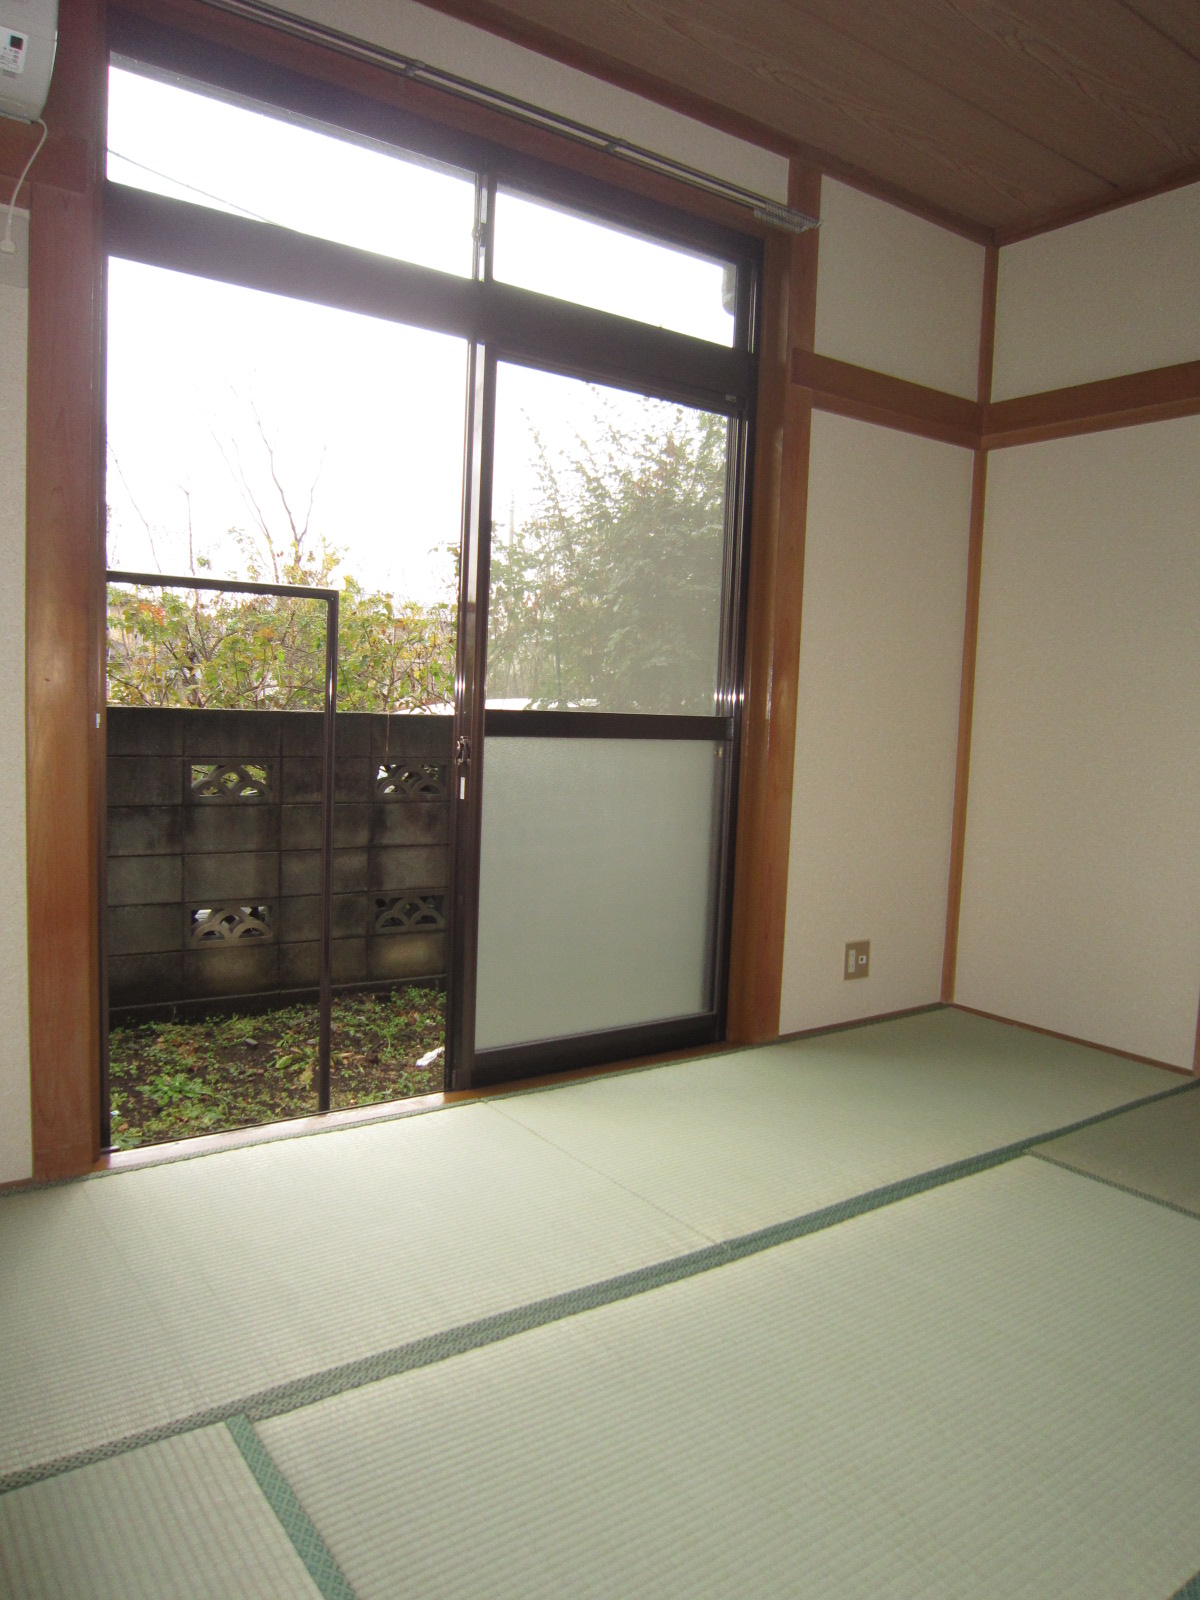 Living and room. It is a bright room because the balcony side is opened